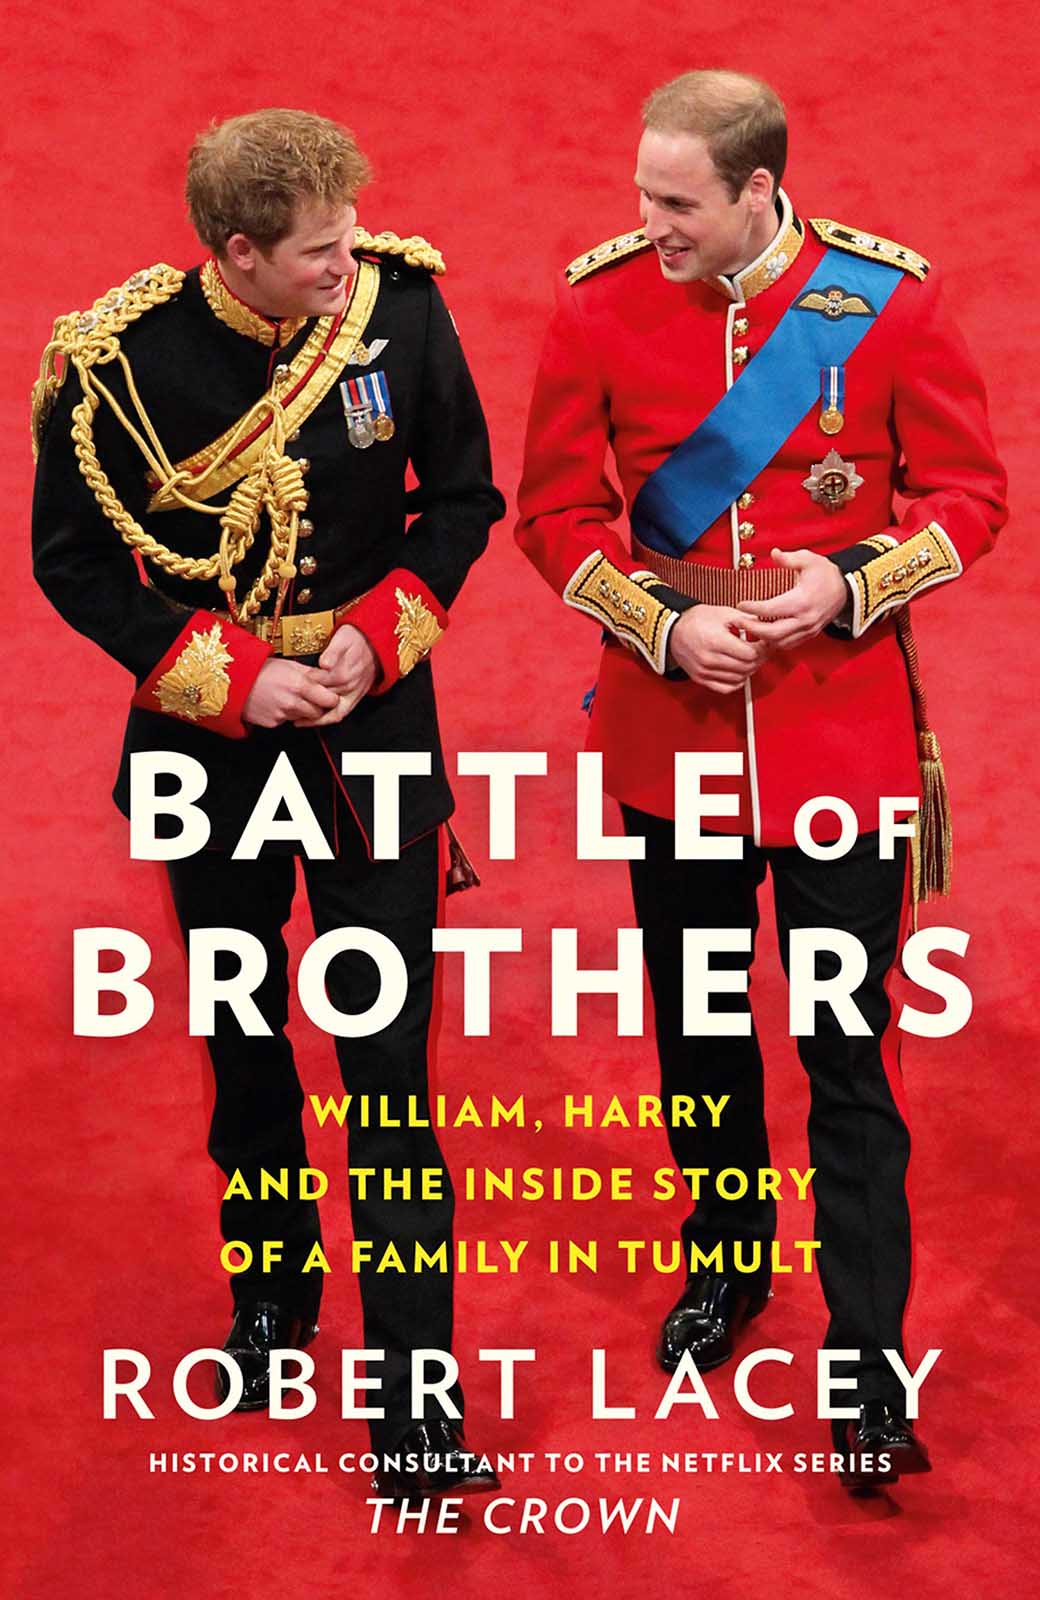 A new book from a "royal expert" is theorizing a massive rift between Prince William and Harry. But how true is this so-called "rift"?